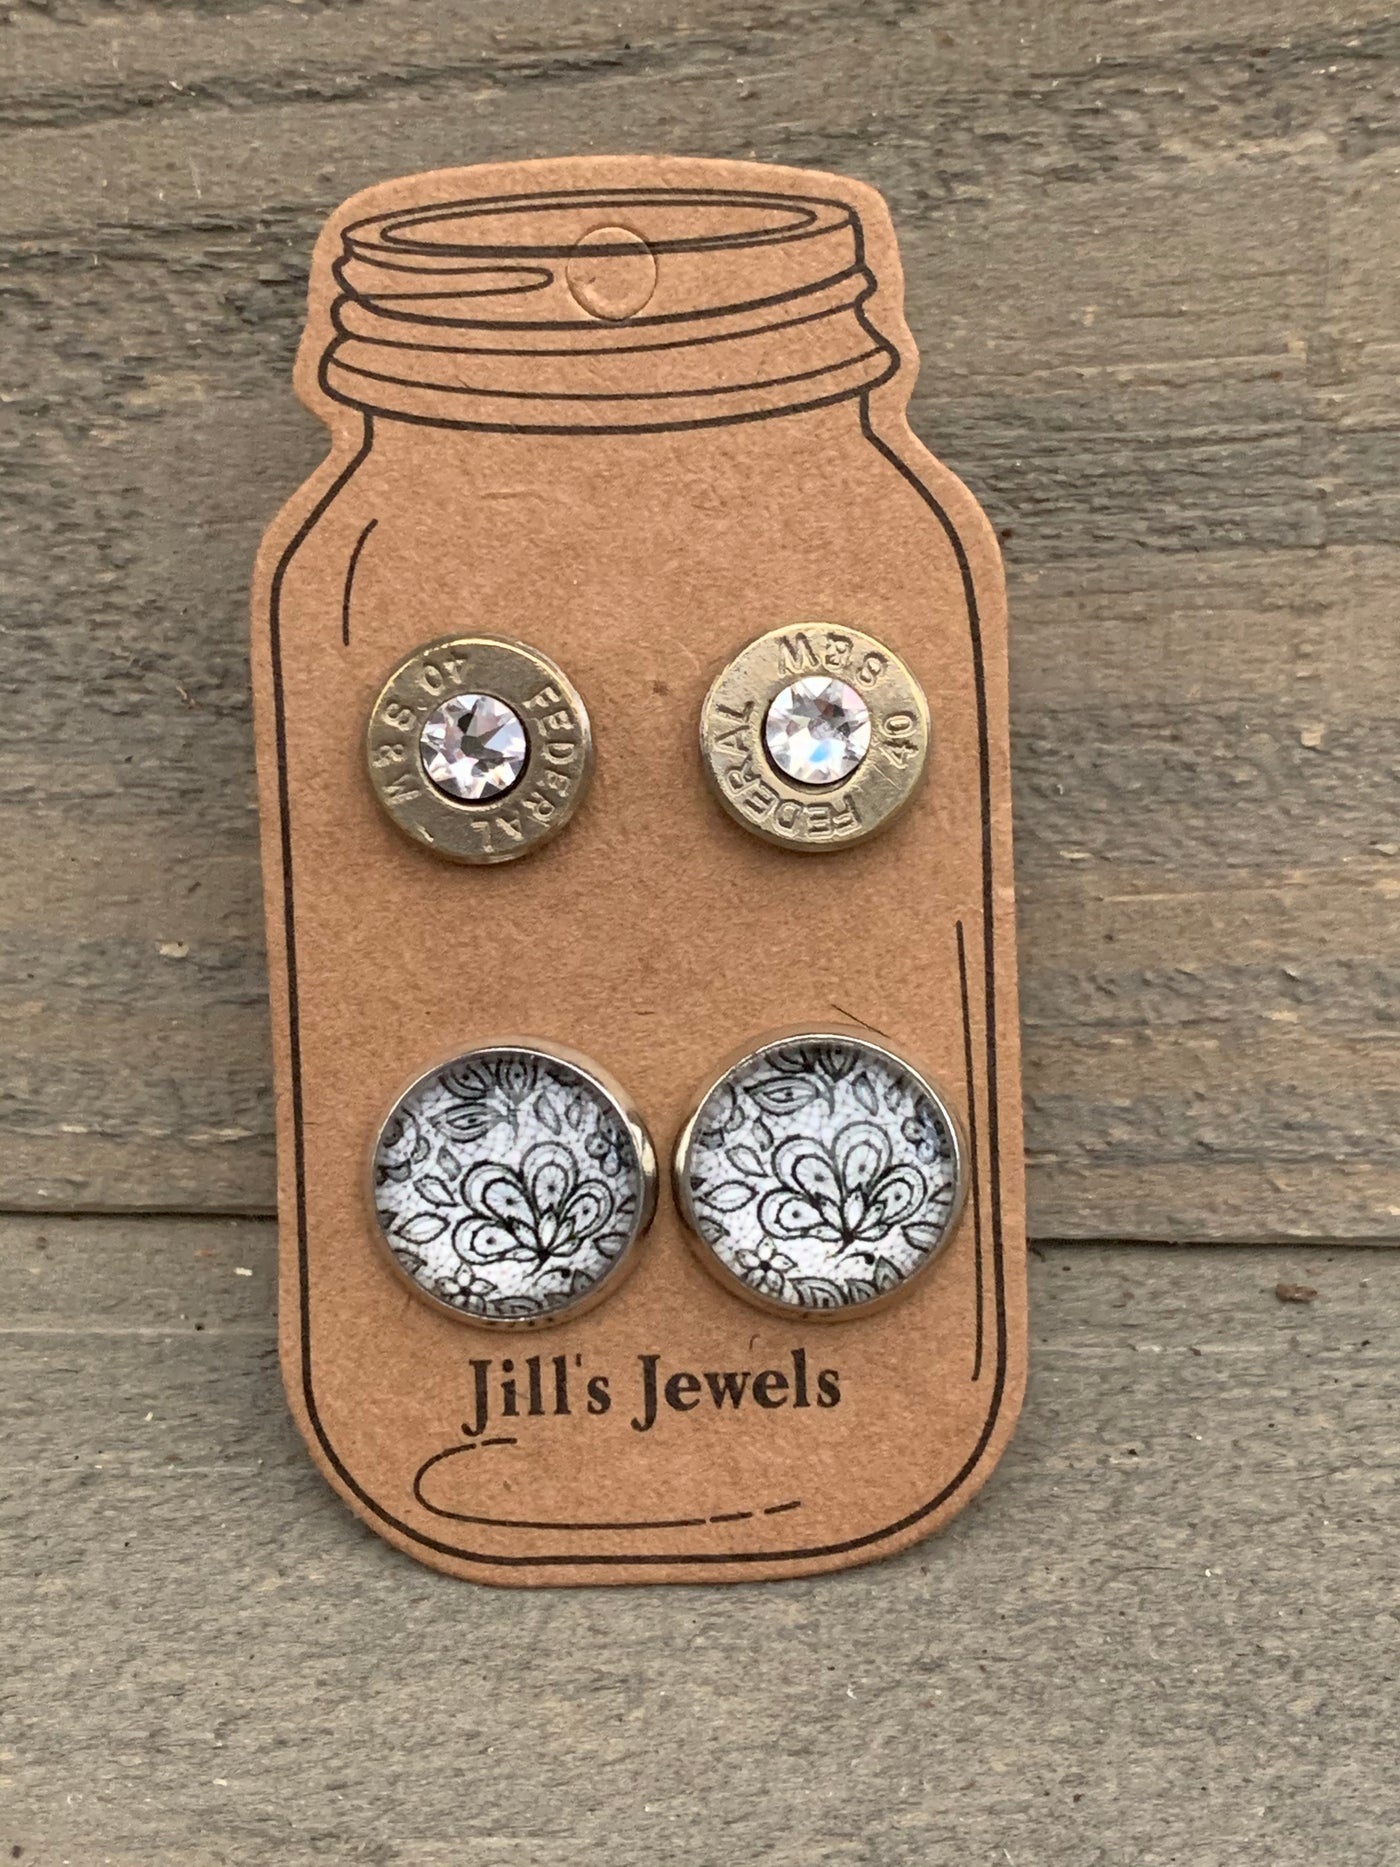 Black and White Lace 40 Caliber bullet earring set - Jill's Jewels | Unique, Handcrafted, Trendy, And Fun Jewelry